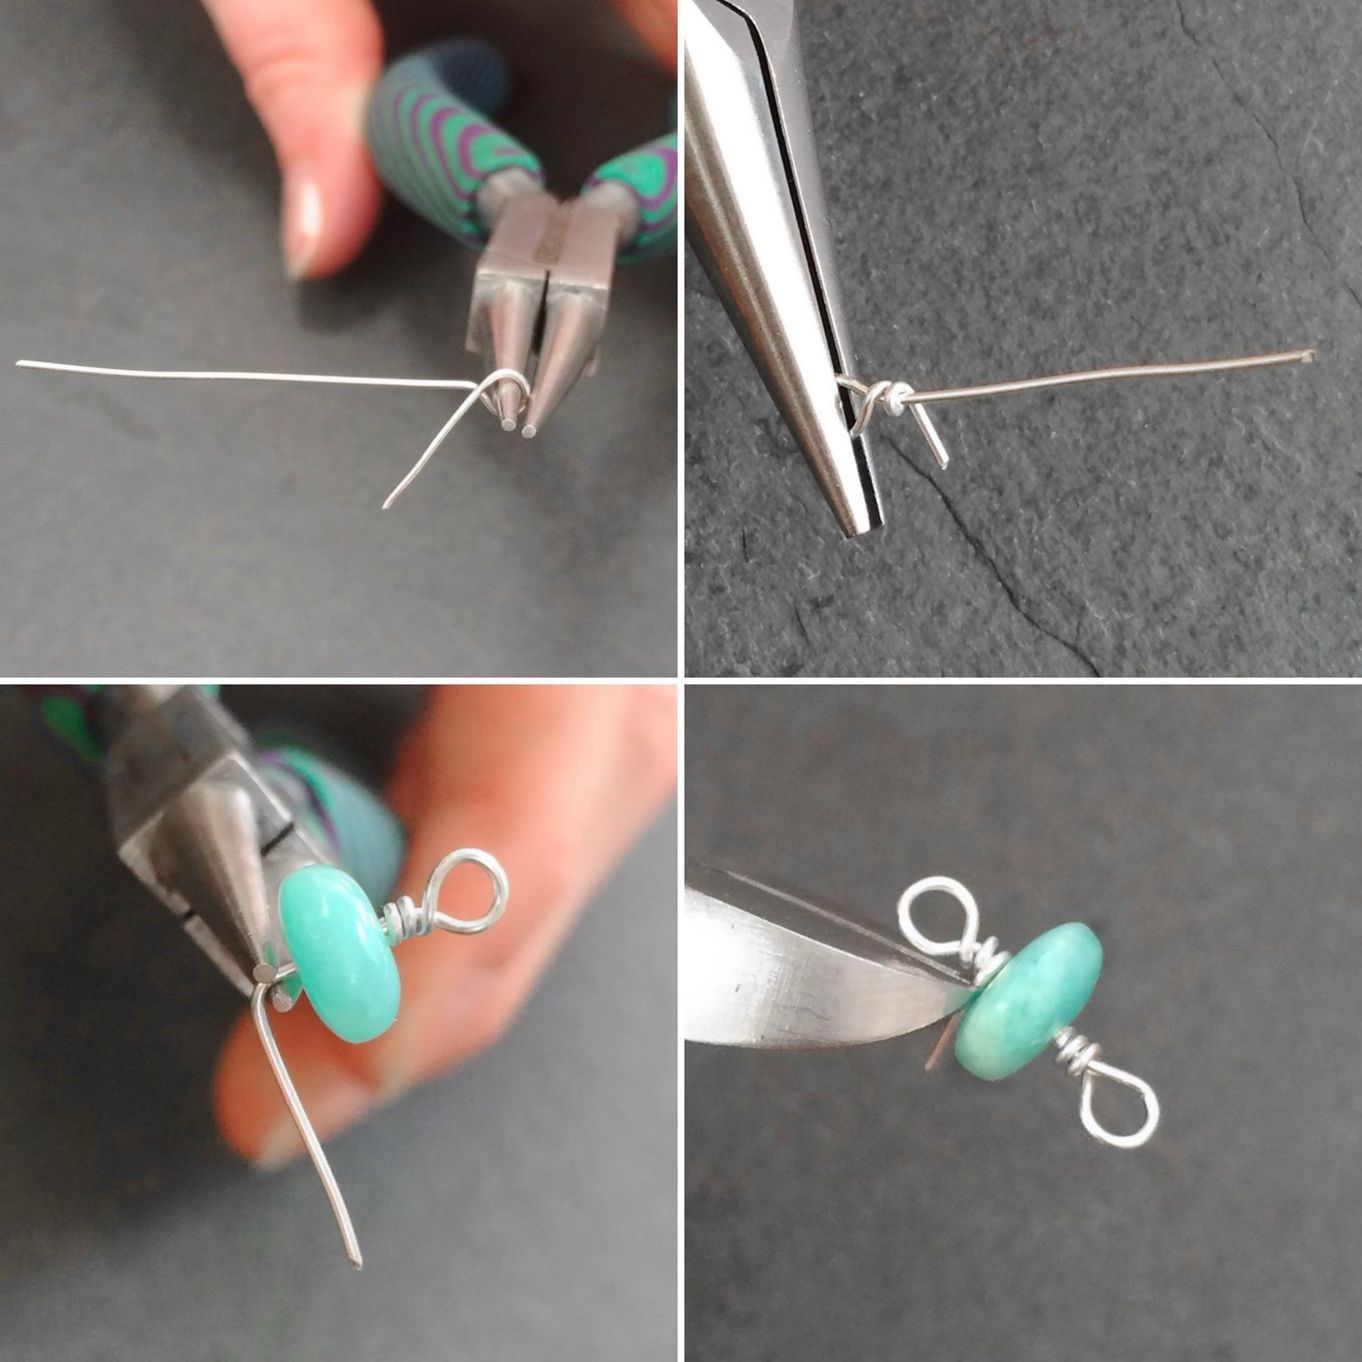 DIY Wire Wrapped Jewelry: Tools and Techniques for Creating Unique